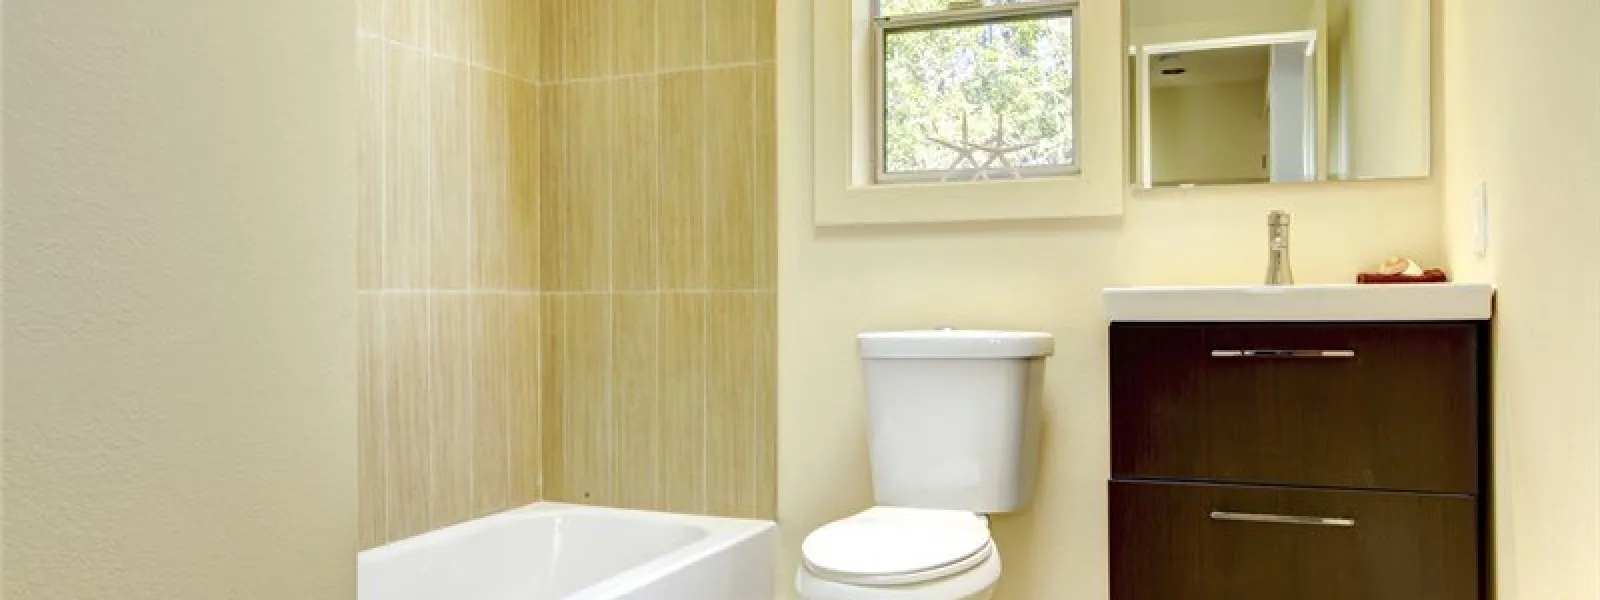 How Important is the Look of Your Bathroom?